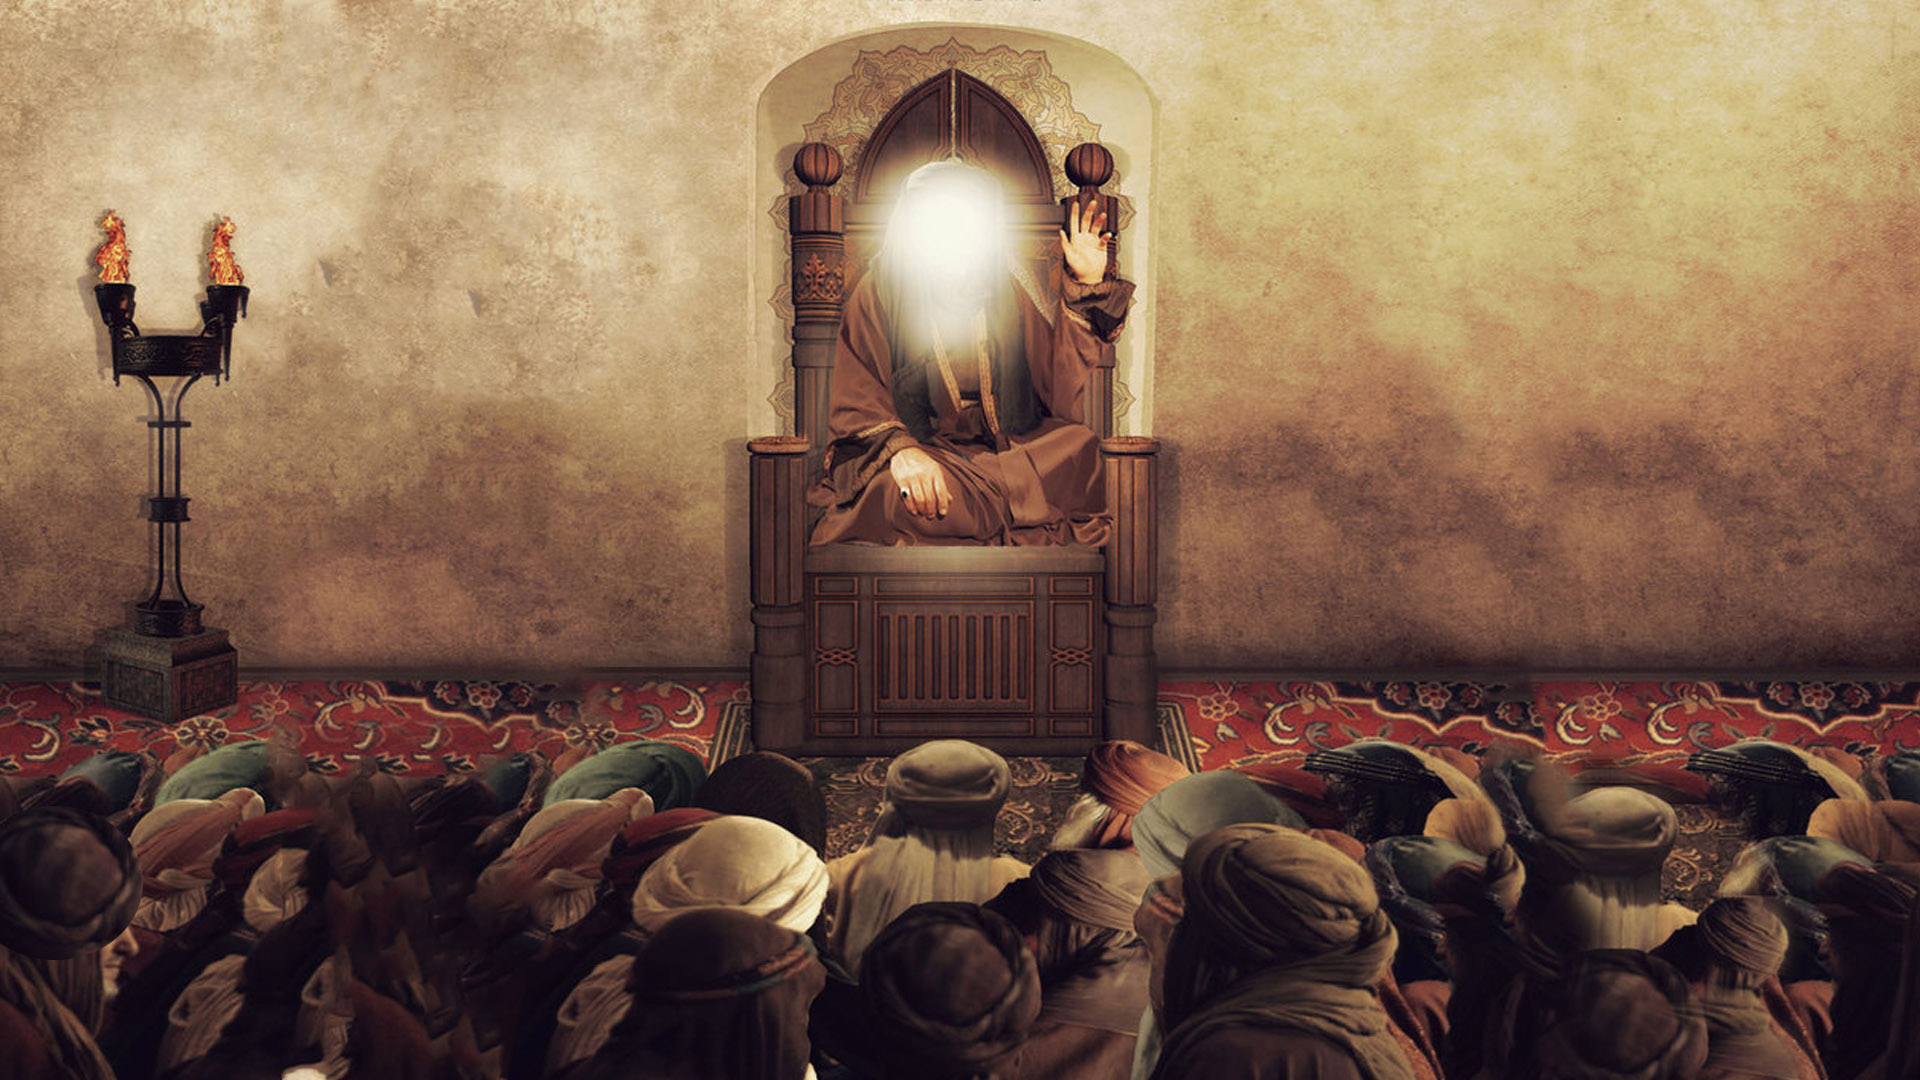 Who is Imam Ali bin Abi Talib, and why do philosophers consider him a great person?